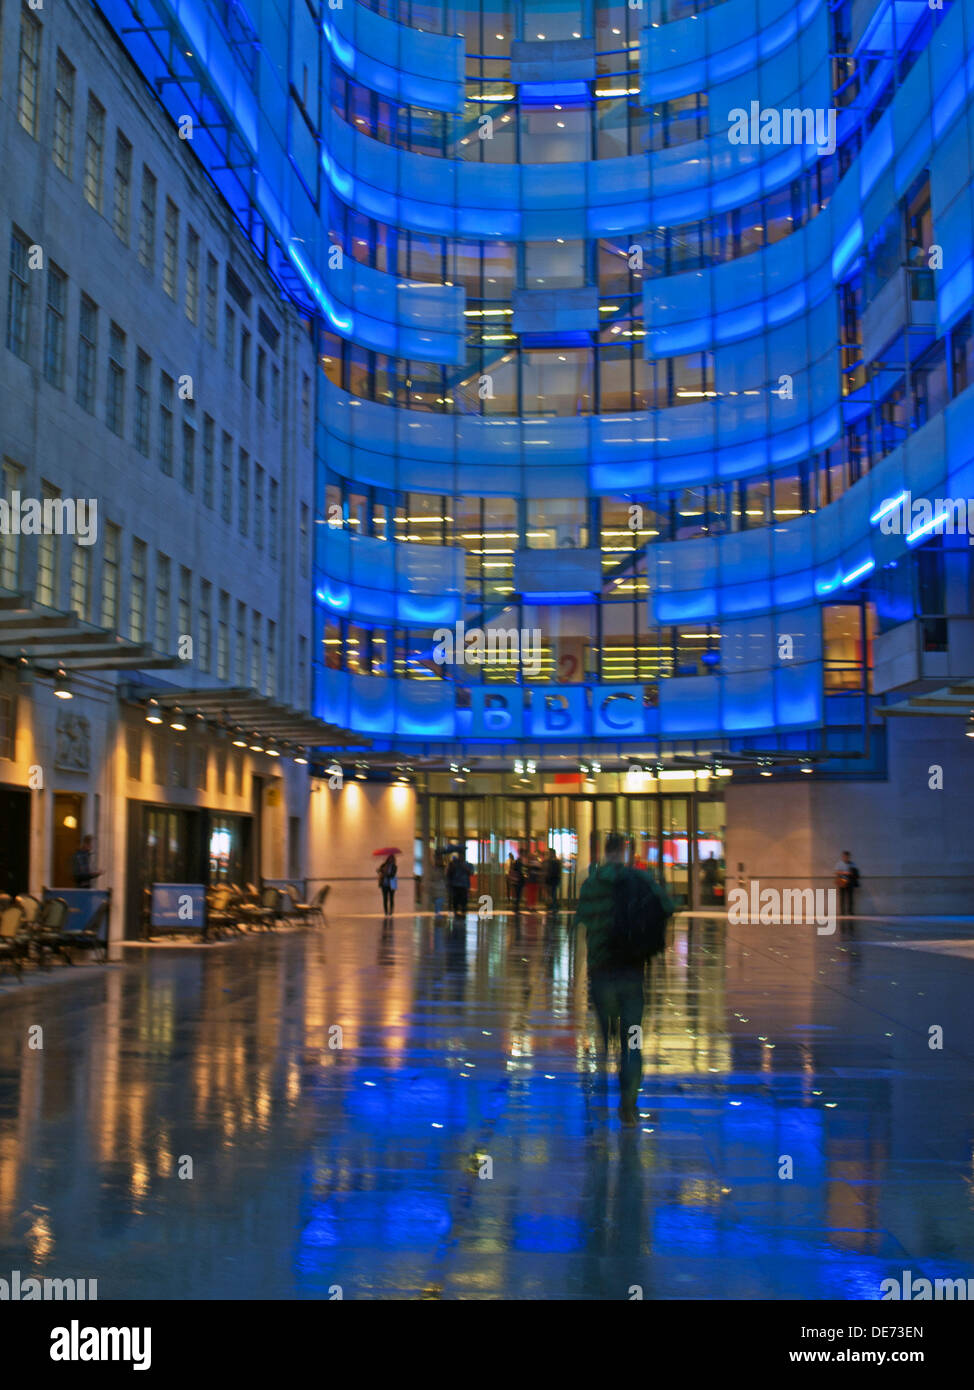 Illuminated view of the BBC Broadcasting House East Wing, Langham Place, City of Westminster, London, England, United Kingdom Stock Photo